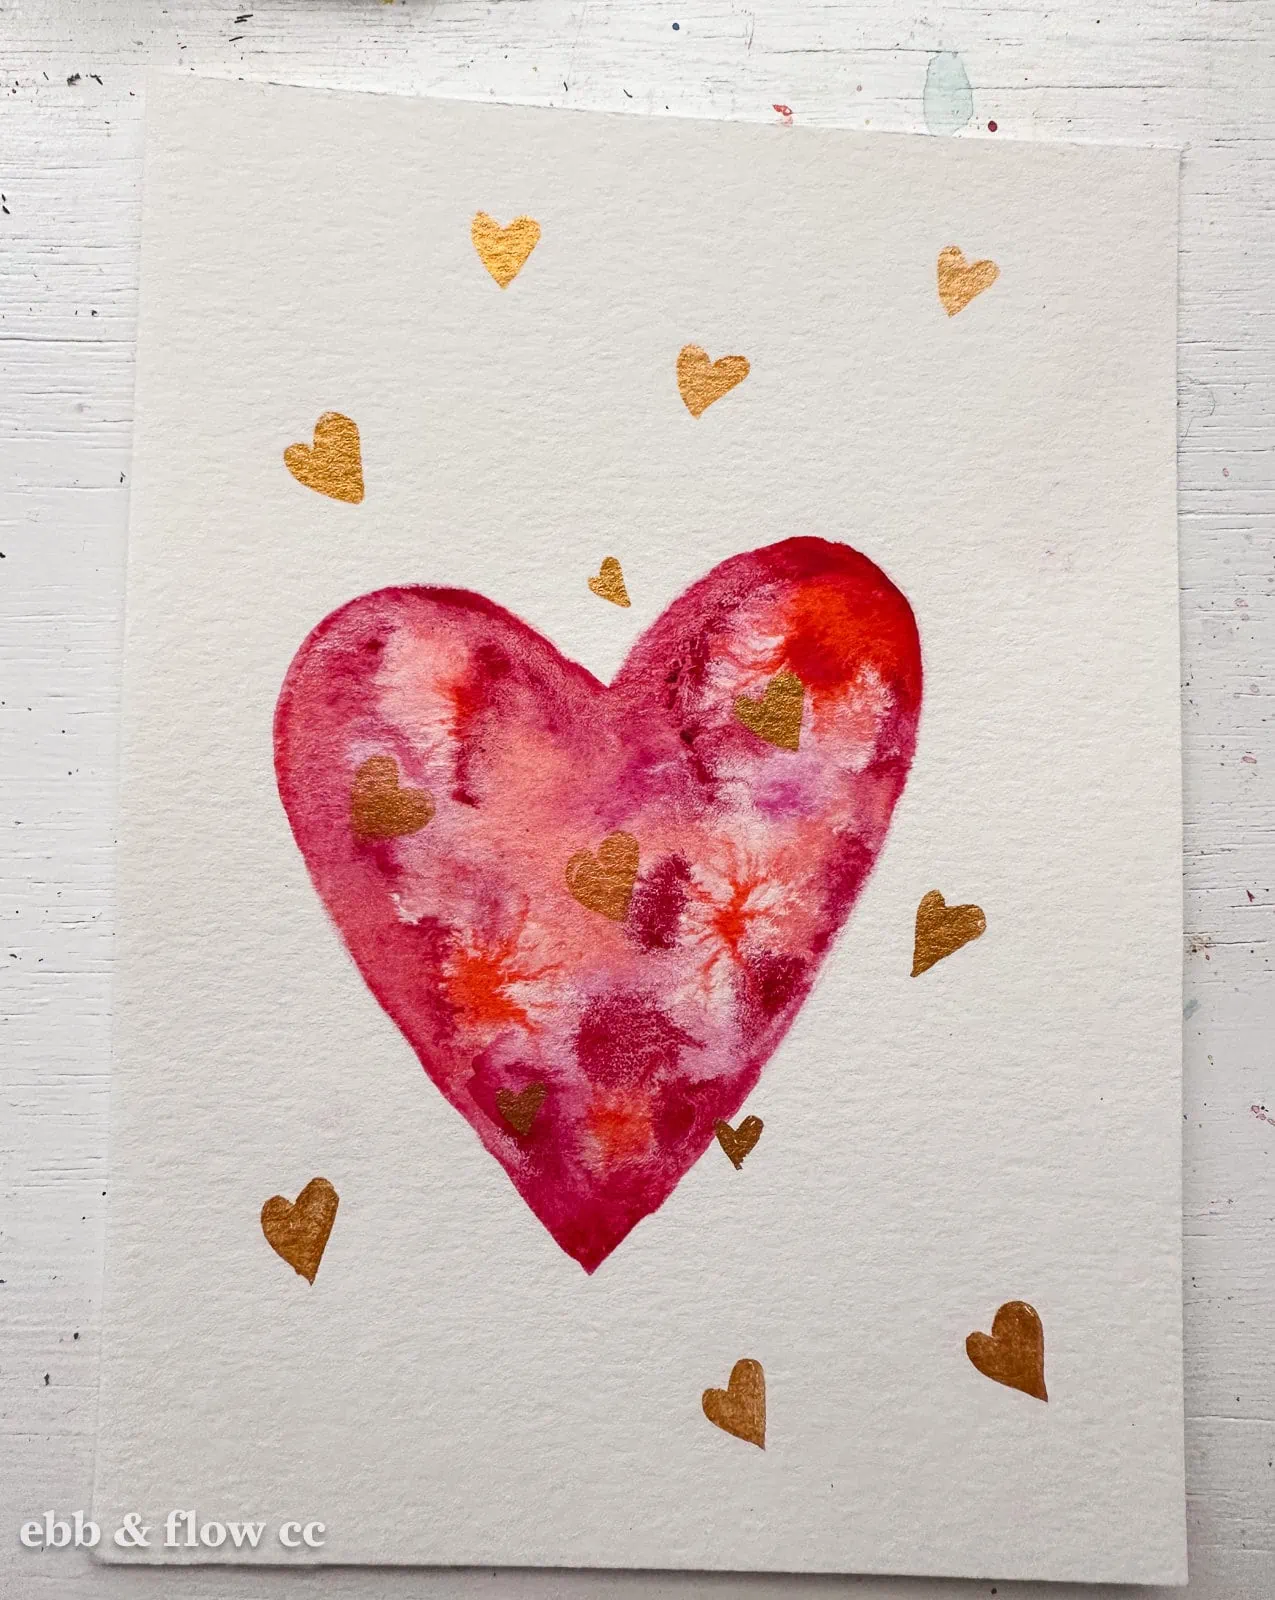 heart card painted in watercolor